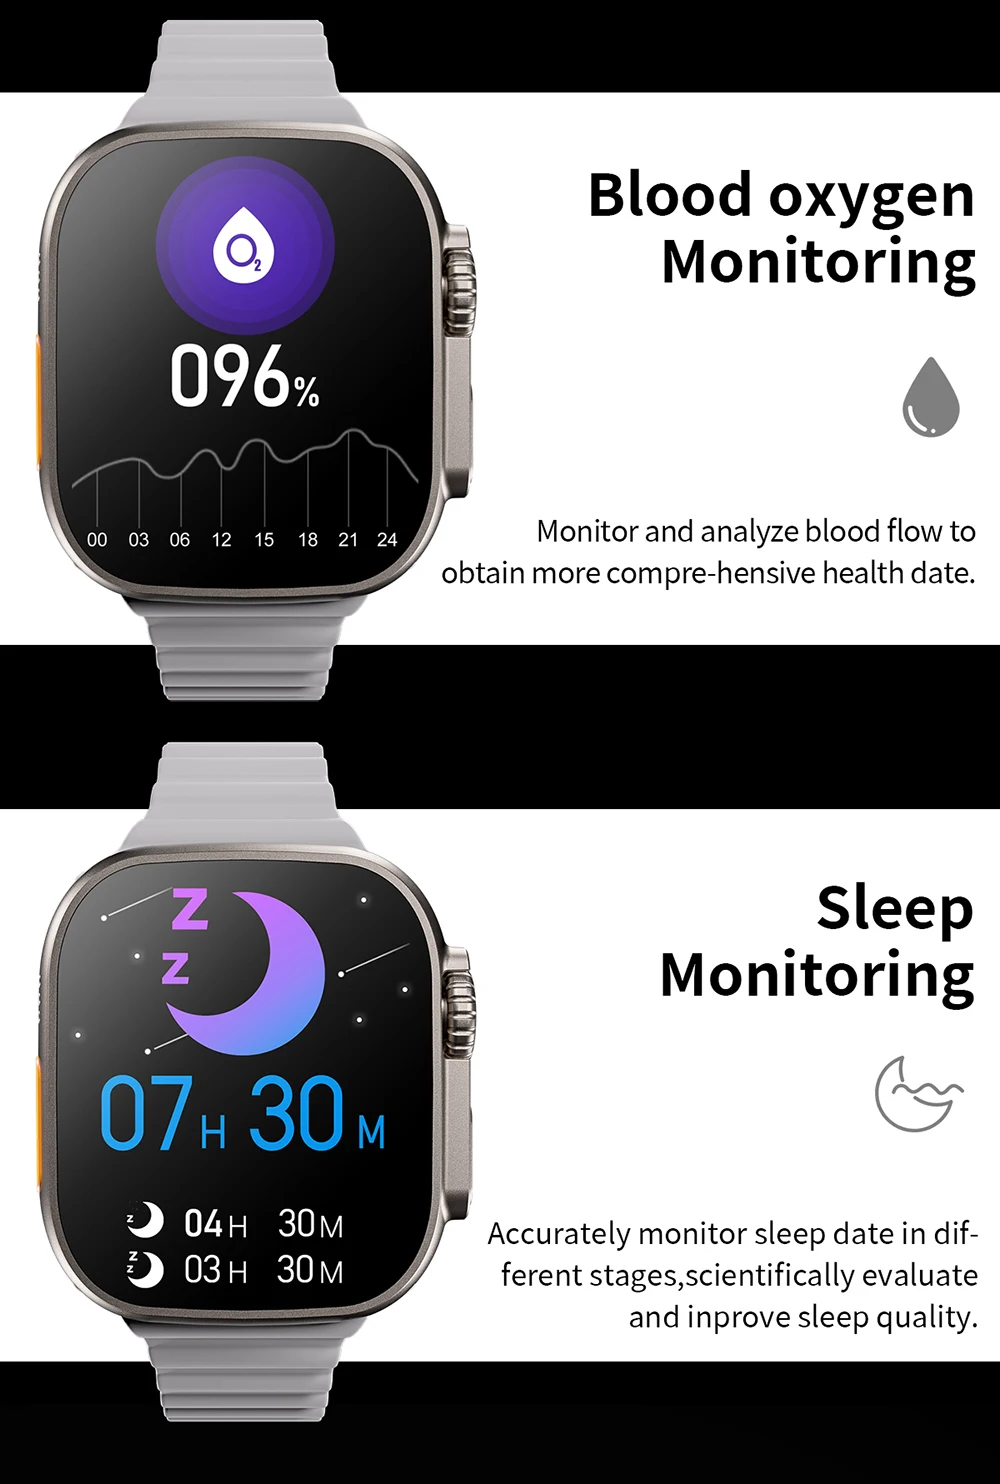 Ultra 8 Smartwatch: Advanced Features for Fitness and Adventure